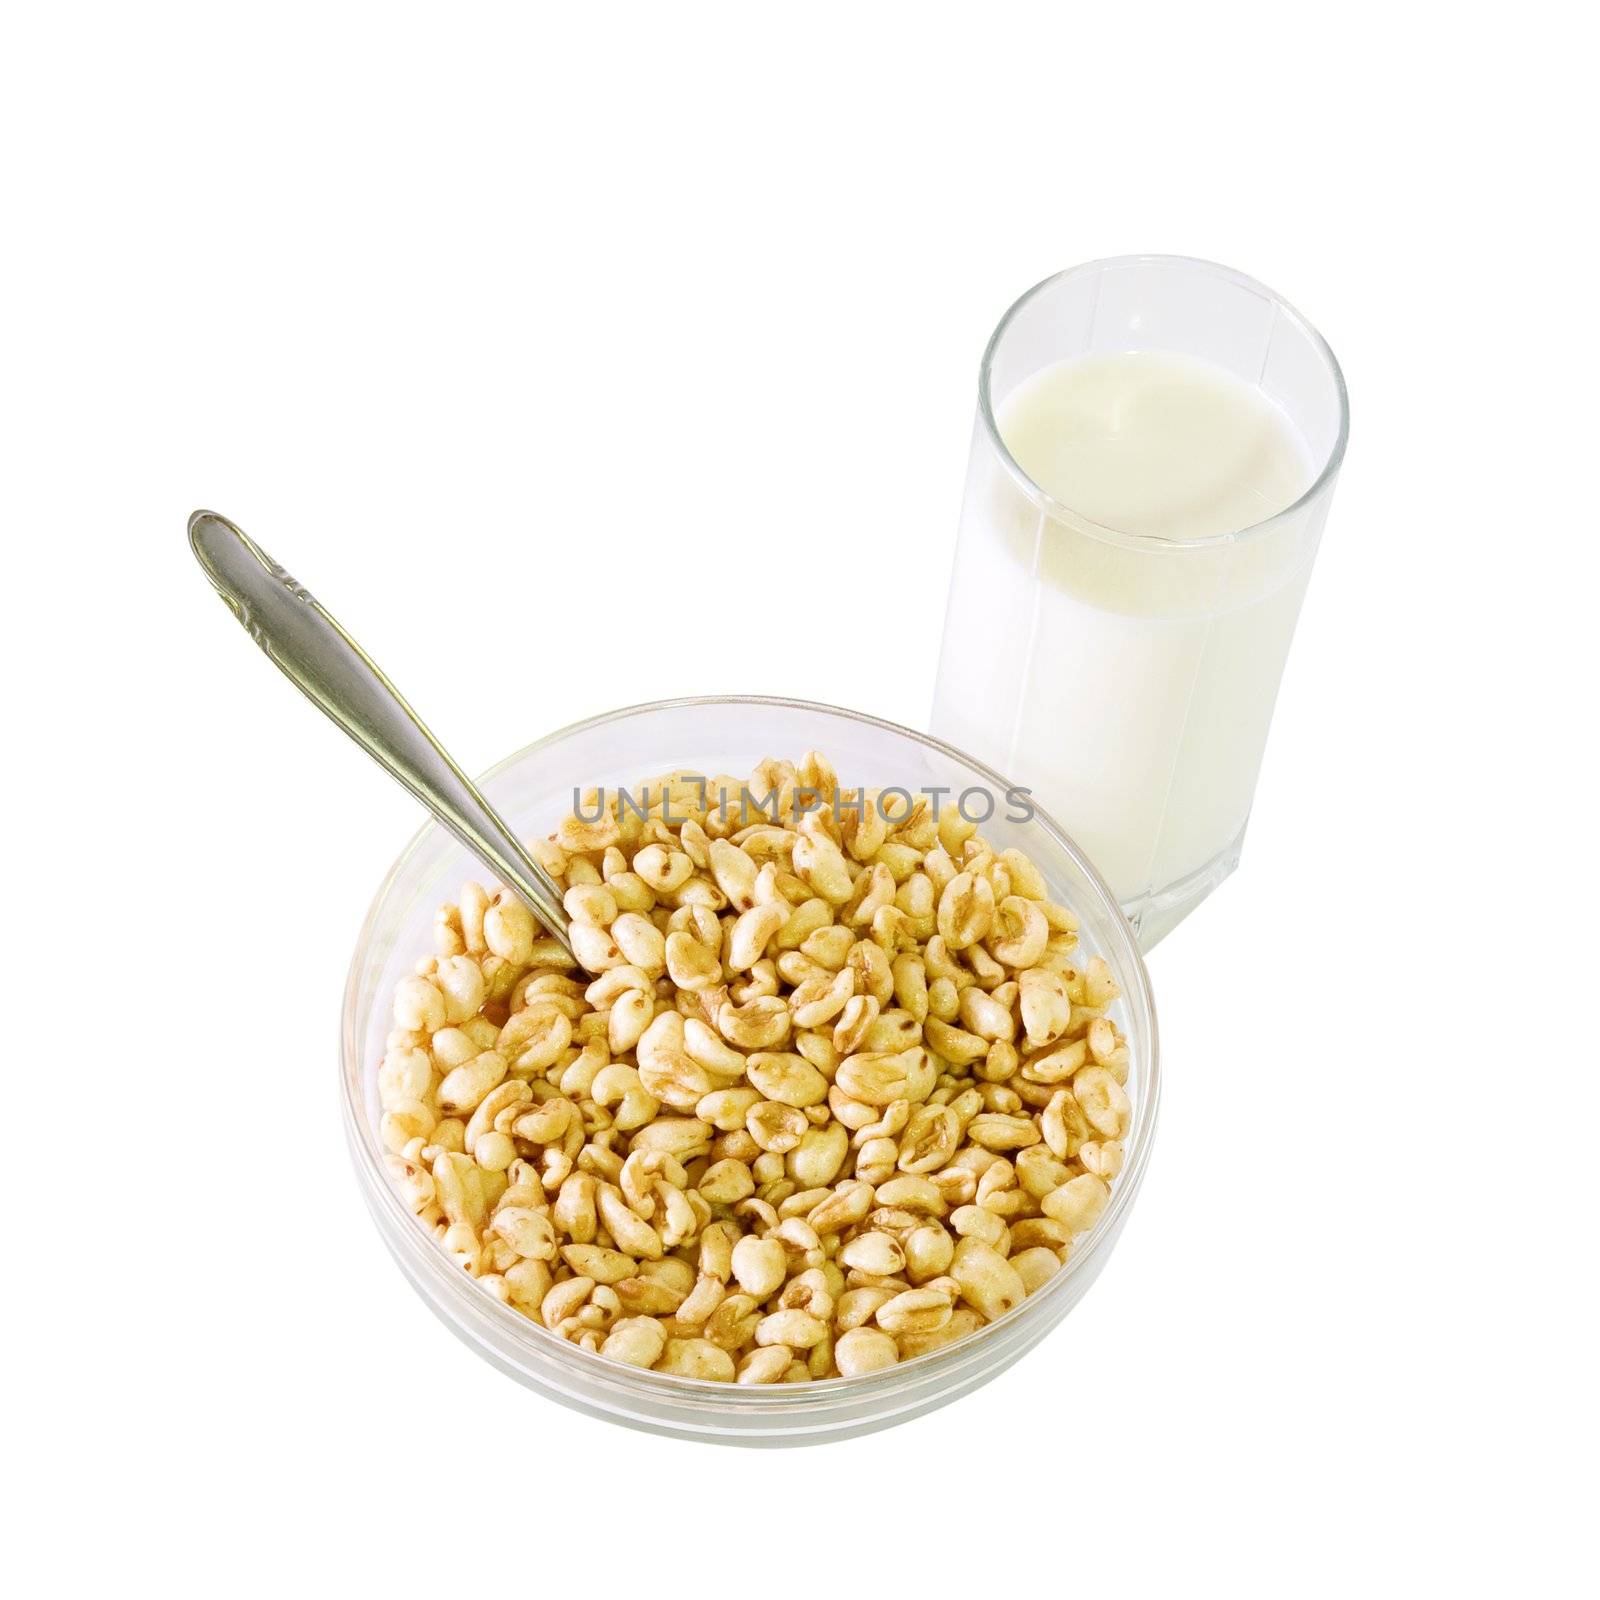 A glass of milk and a bowl of cereals